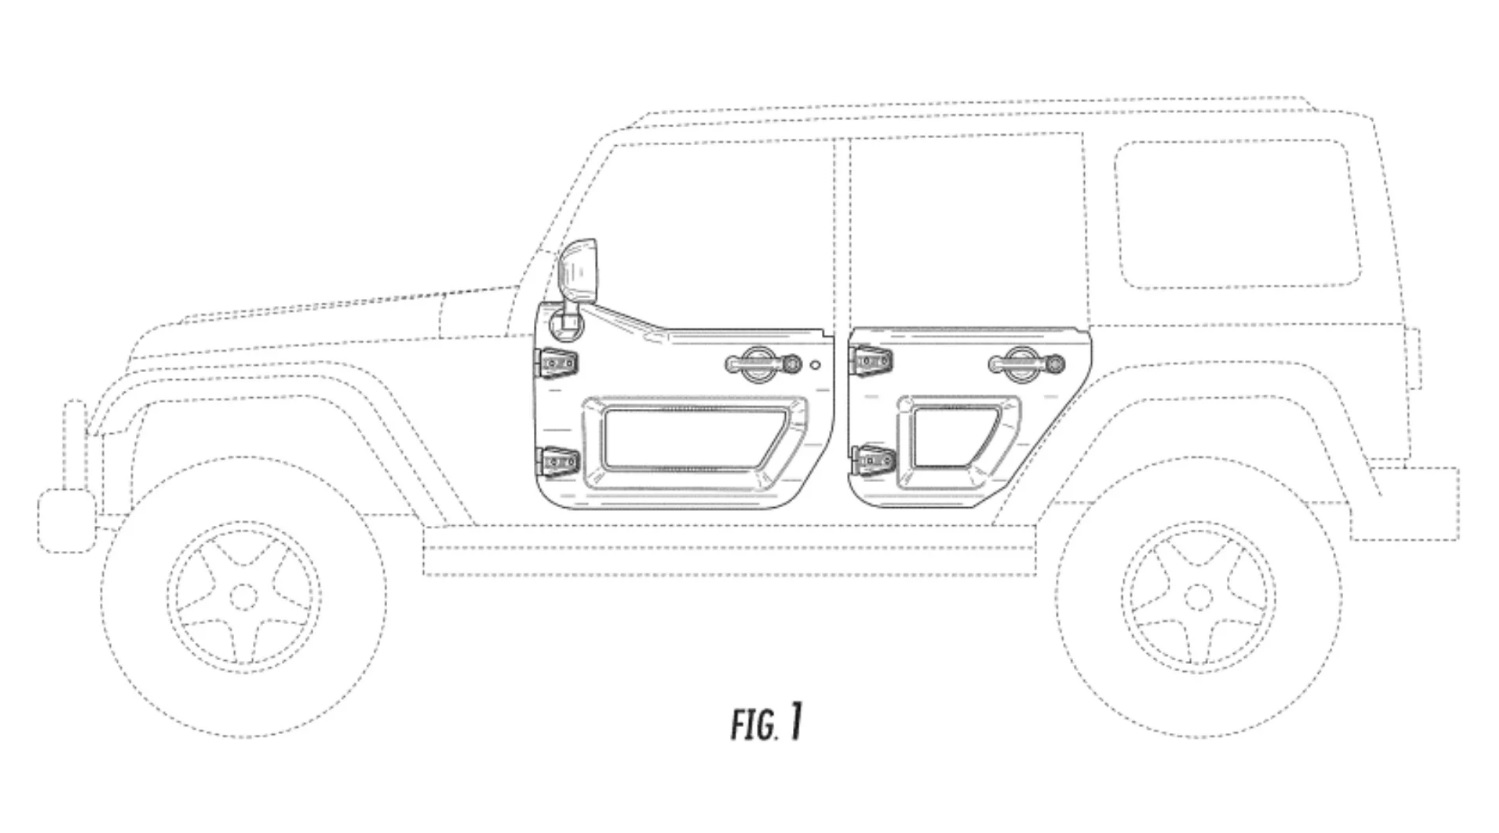 Jeep Wrangler donut doors patent images Photo Gallery